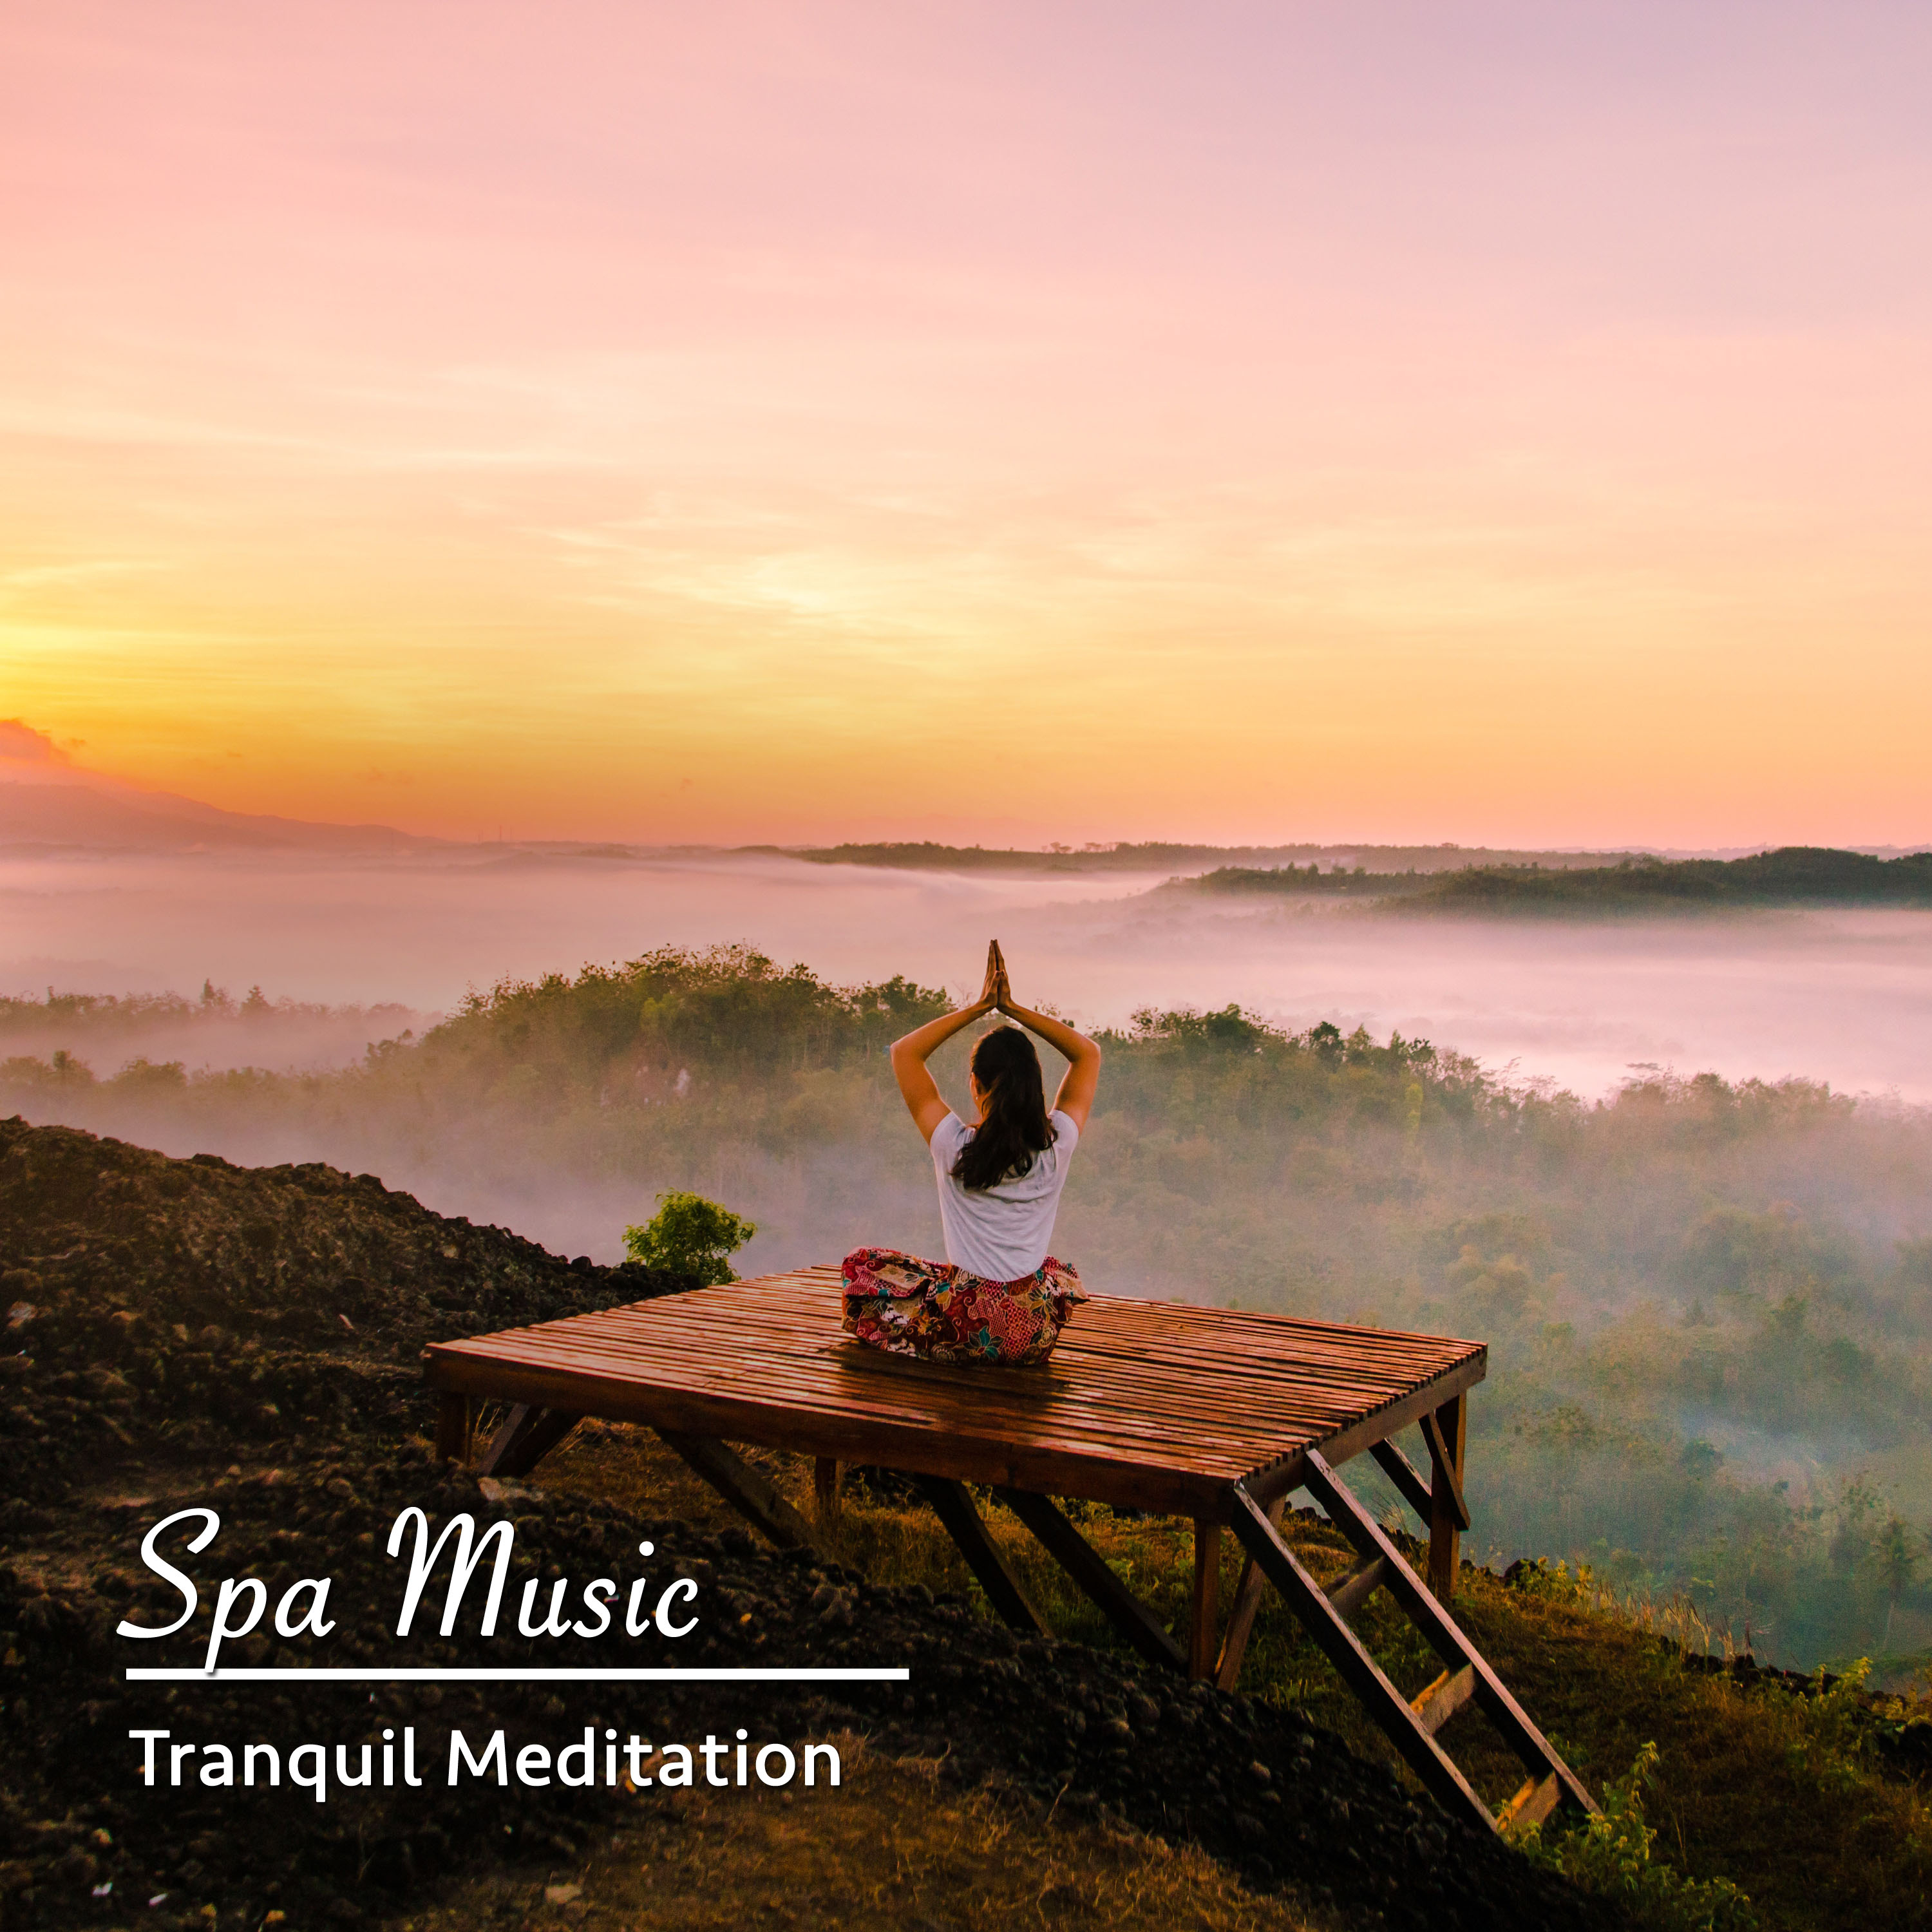 13 Tranquil Mediation and Spa Music